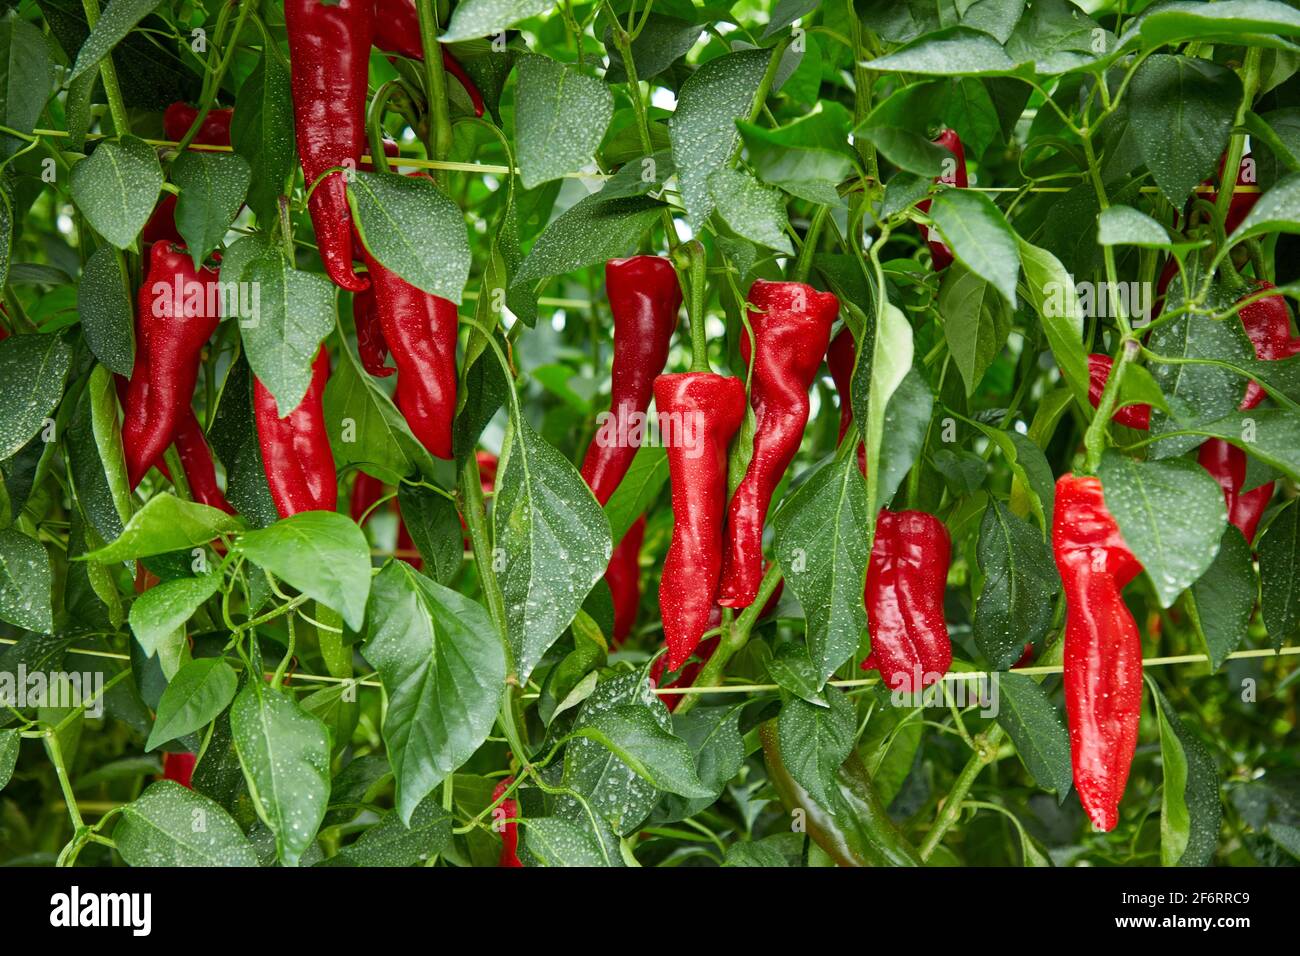 Greenhouse pepper cultivation, Institute for Agricultural Research and Development and the Natural Environment, Basque Country, Spain, Europe. Stock Photo